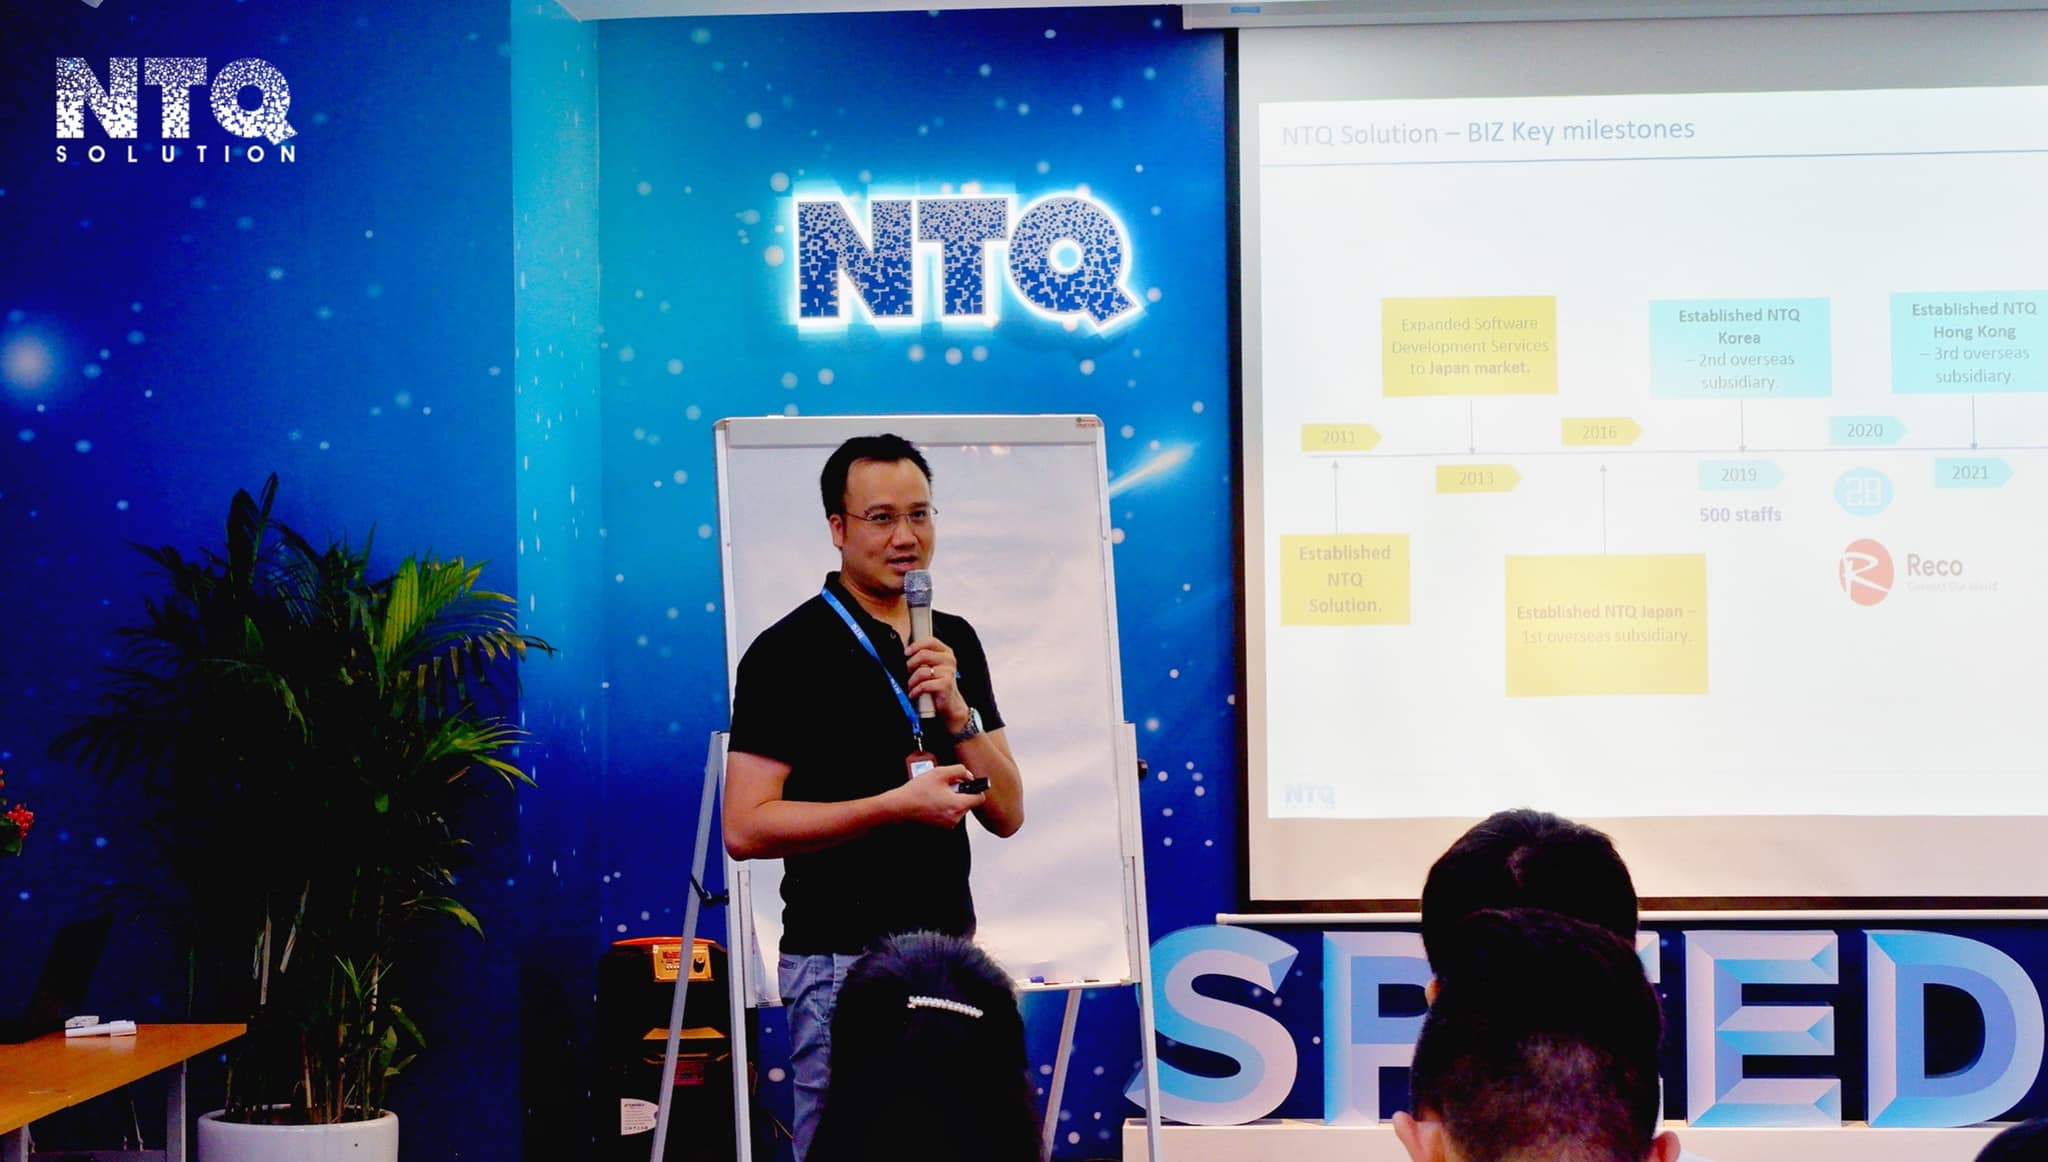 NTQ Solution Welcomed Over 50 Crucial Partners To Visit The Company 